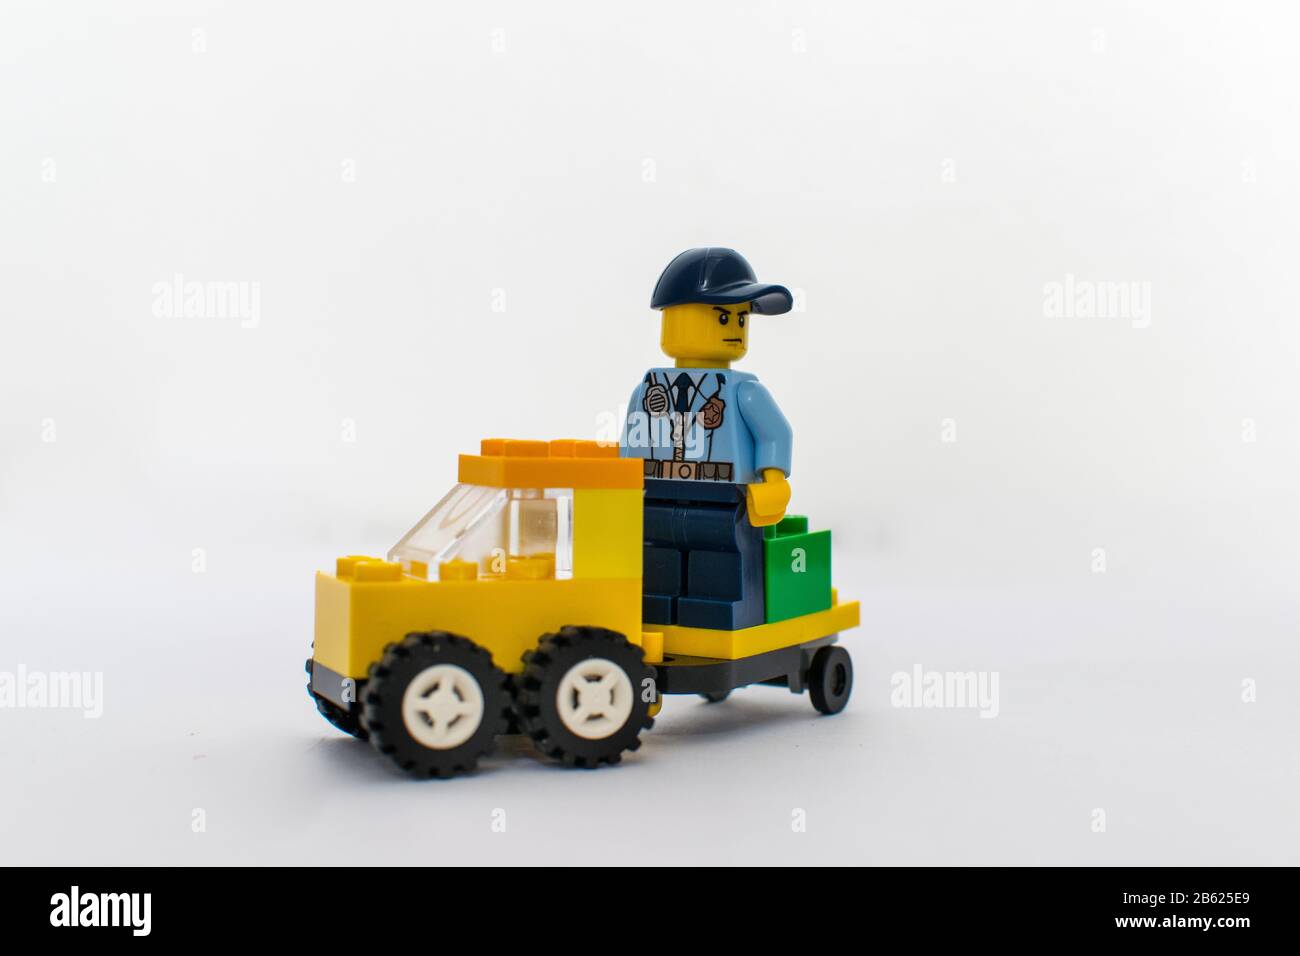 Toy image of a toy car with a toy person Stock Photo